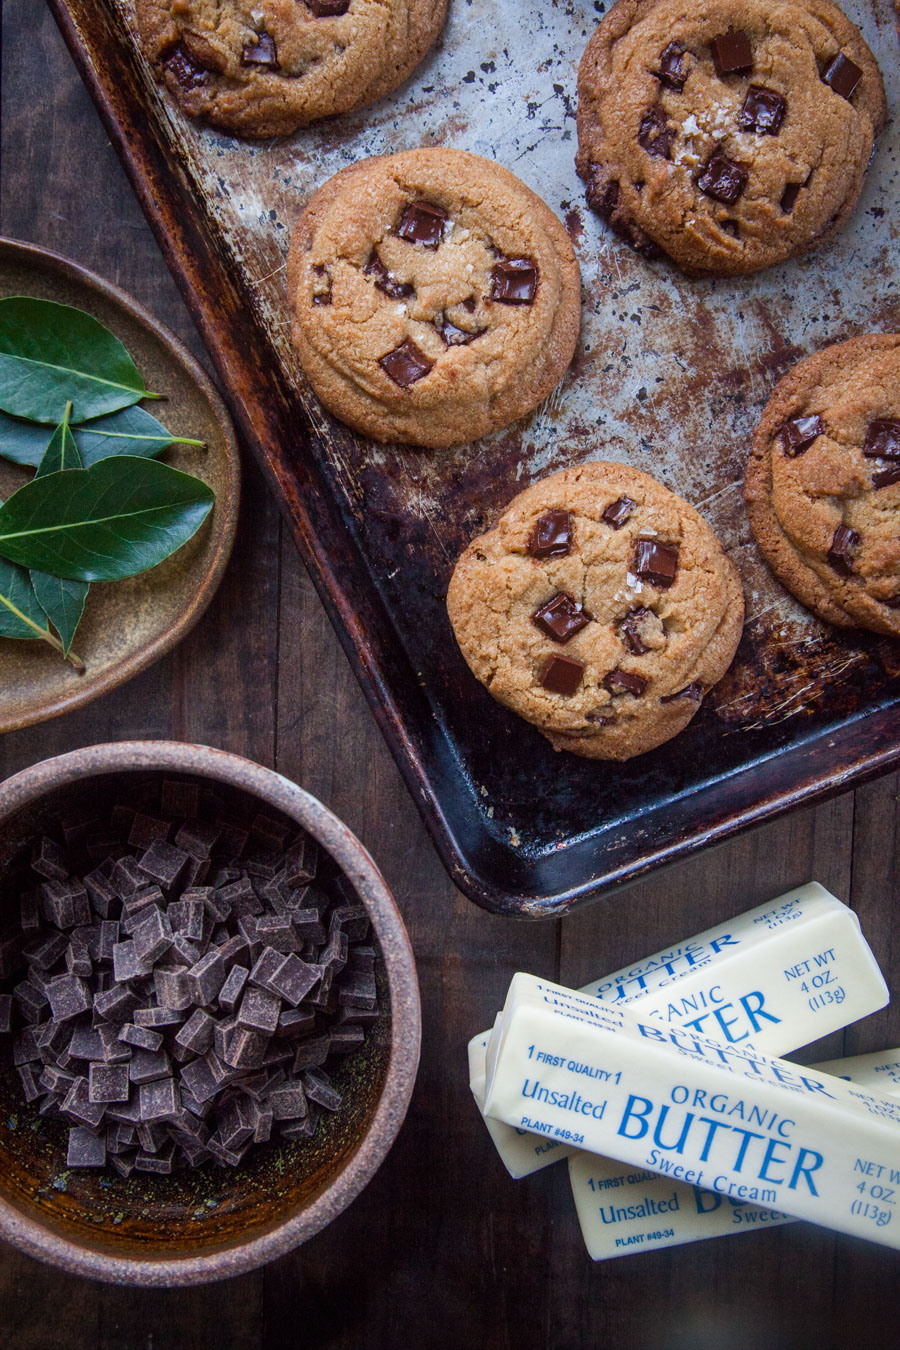 Bay Leaf, Vanilla, and Brown Butter Chocolate Chunk Cookies. Photo and recipe by Irvin Lin of Eat the Love.